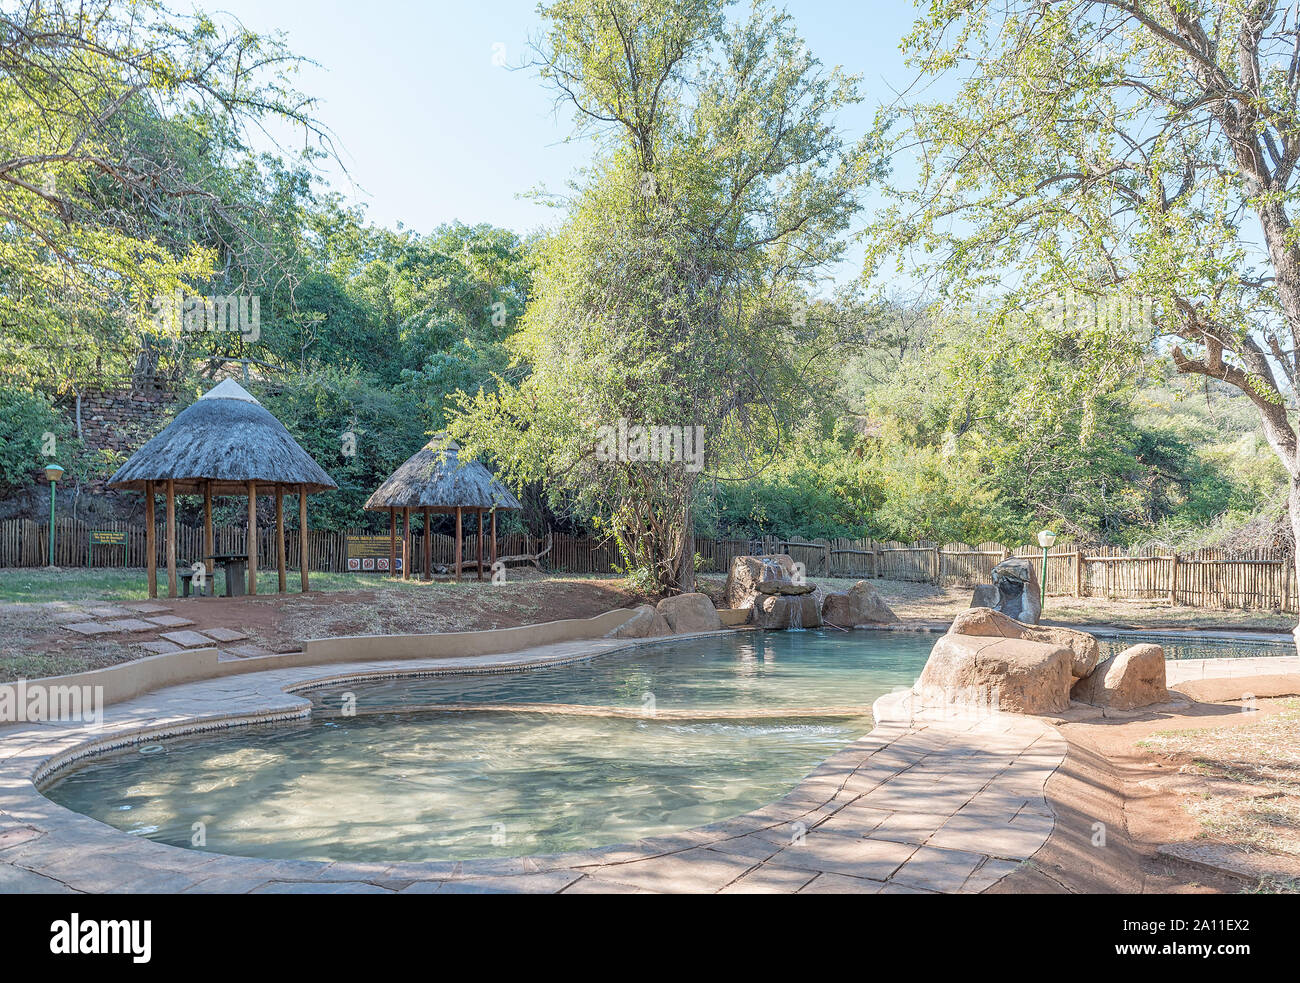 KRUGER NATIONAL PARK, SOUTH AFRICA - MAY 16, 2019: The swimming pool at Punda Maria Rest Camp Stock Photo